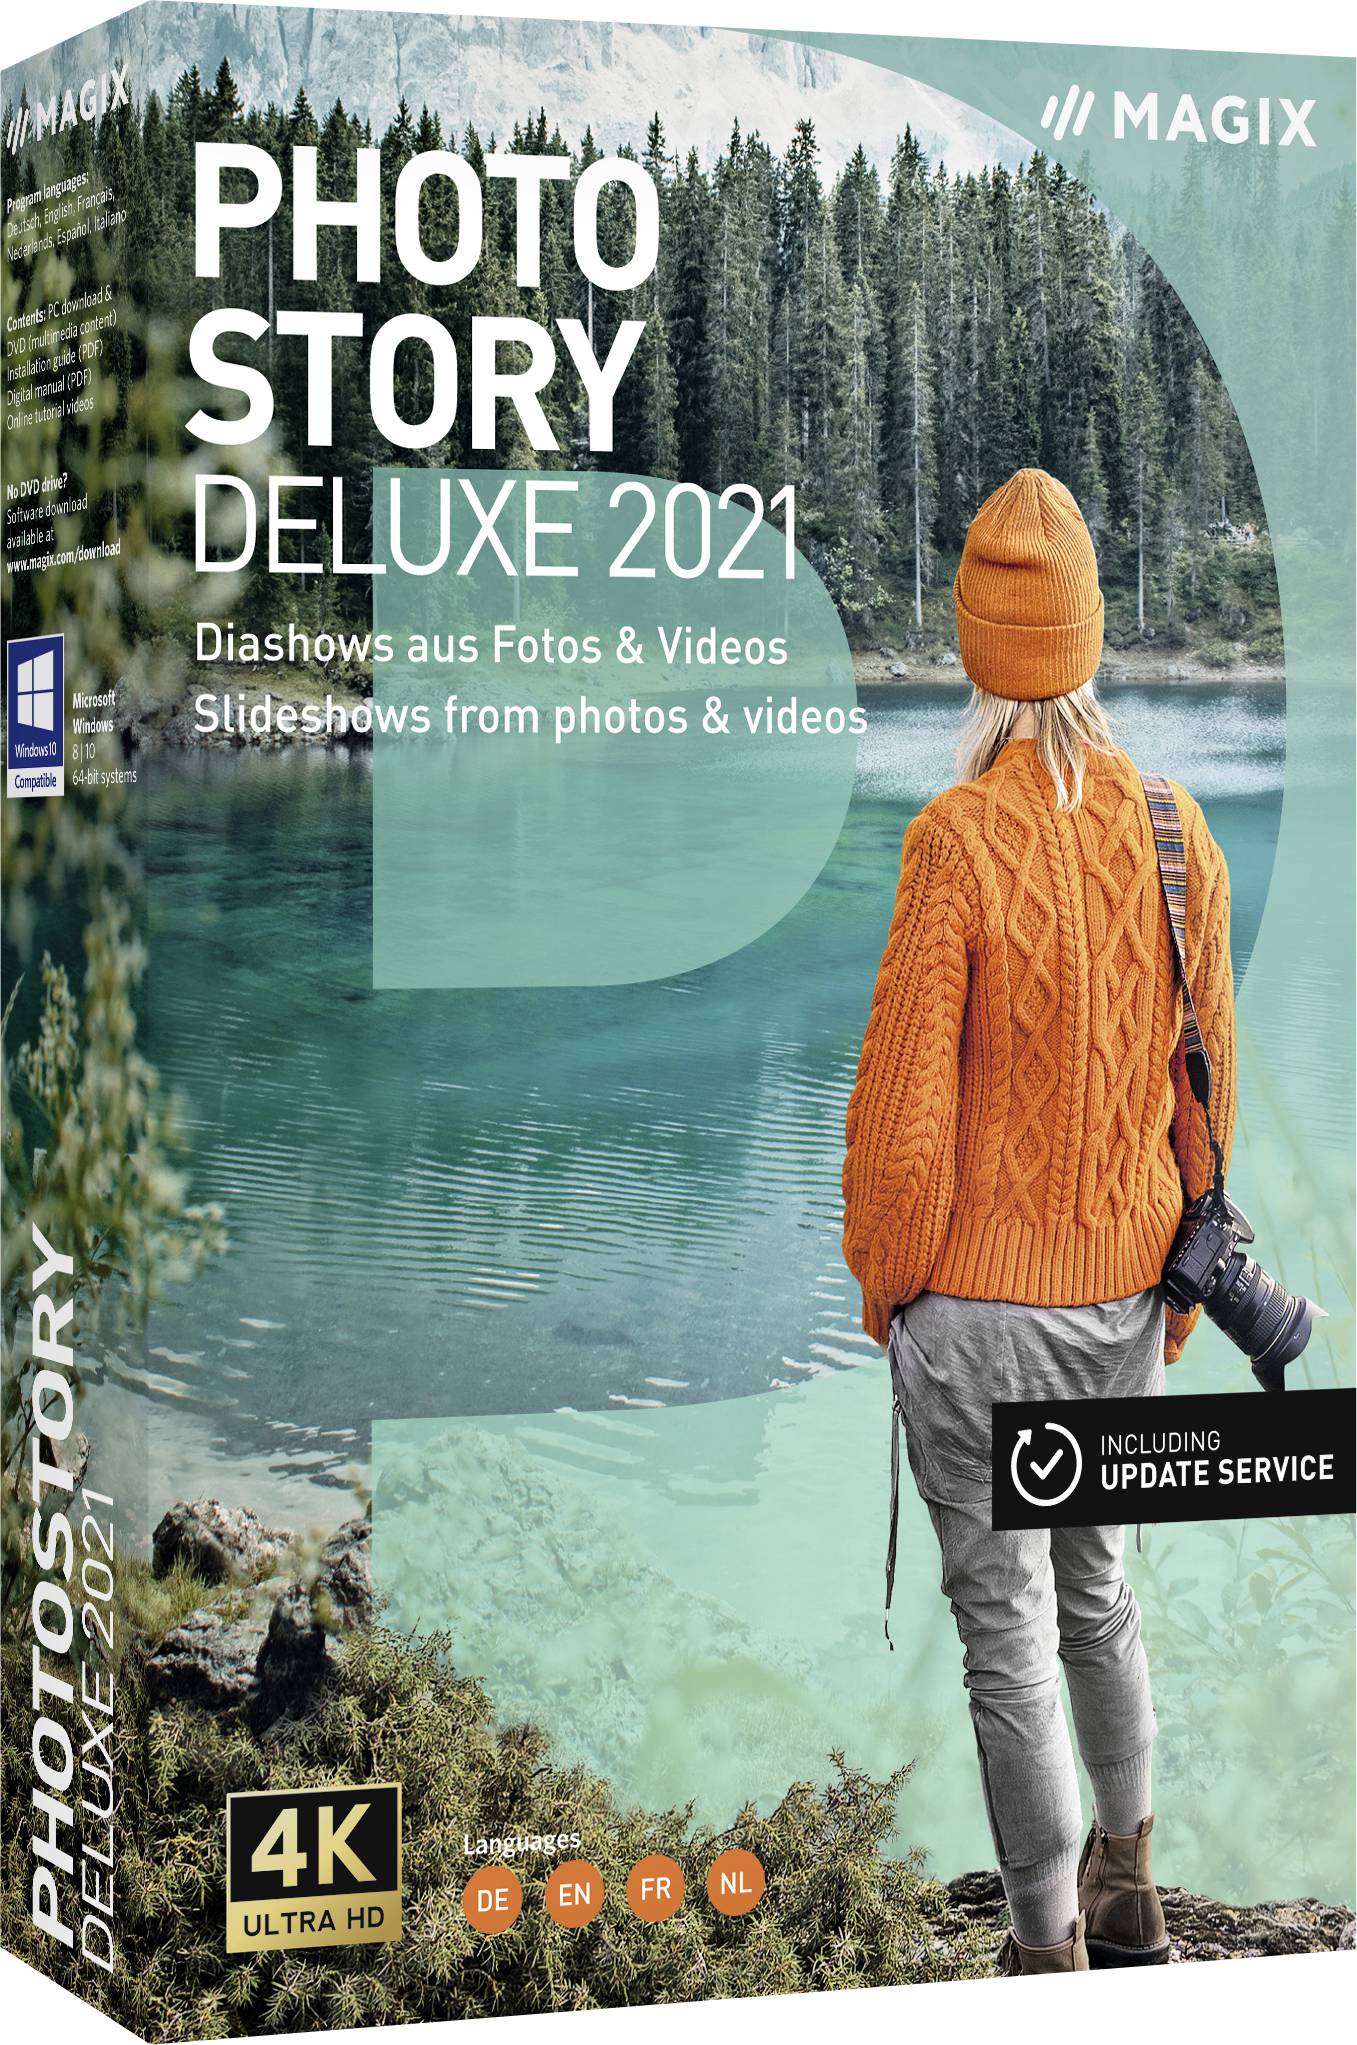 download the last version for apple MAGIX Photostory Deluxe 2024 v23.0.1.158